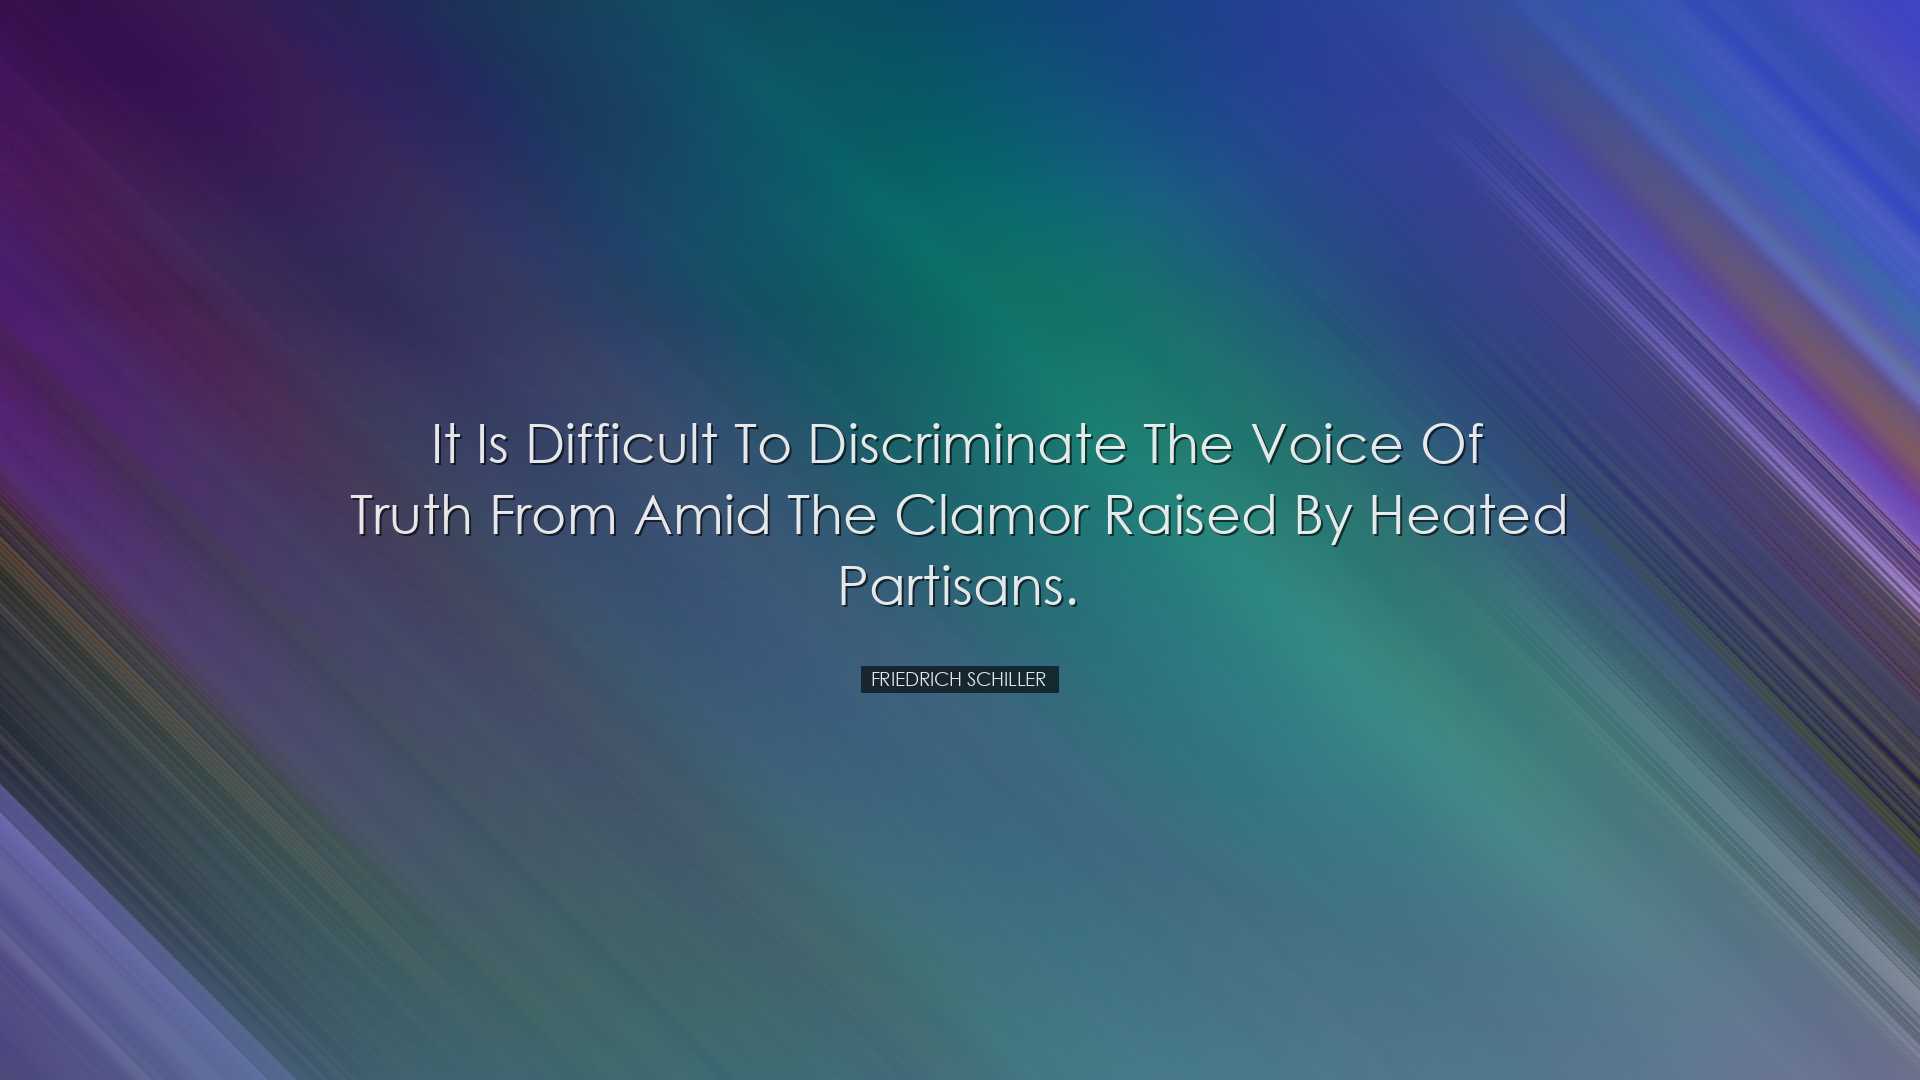 It is difficult to discriminate the voice of truth from amid the c